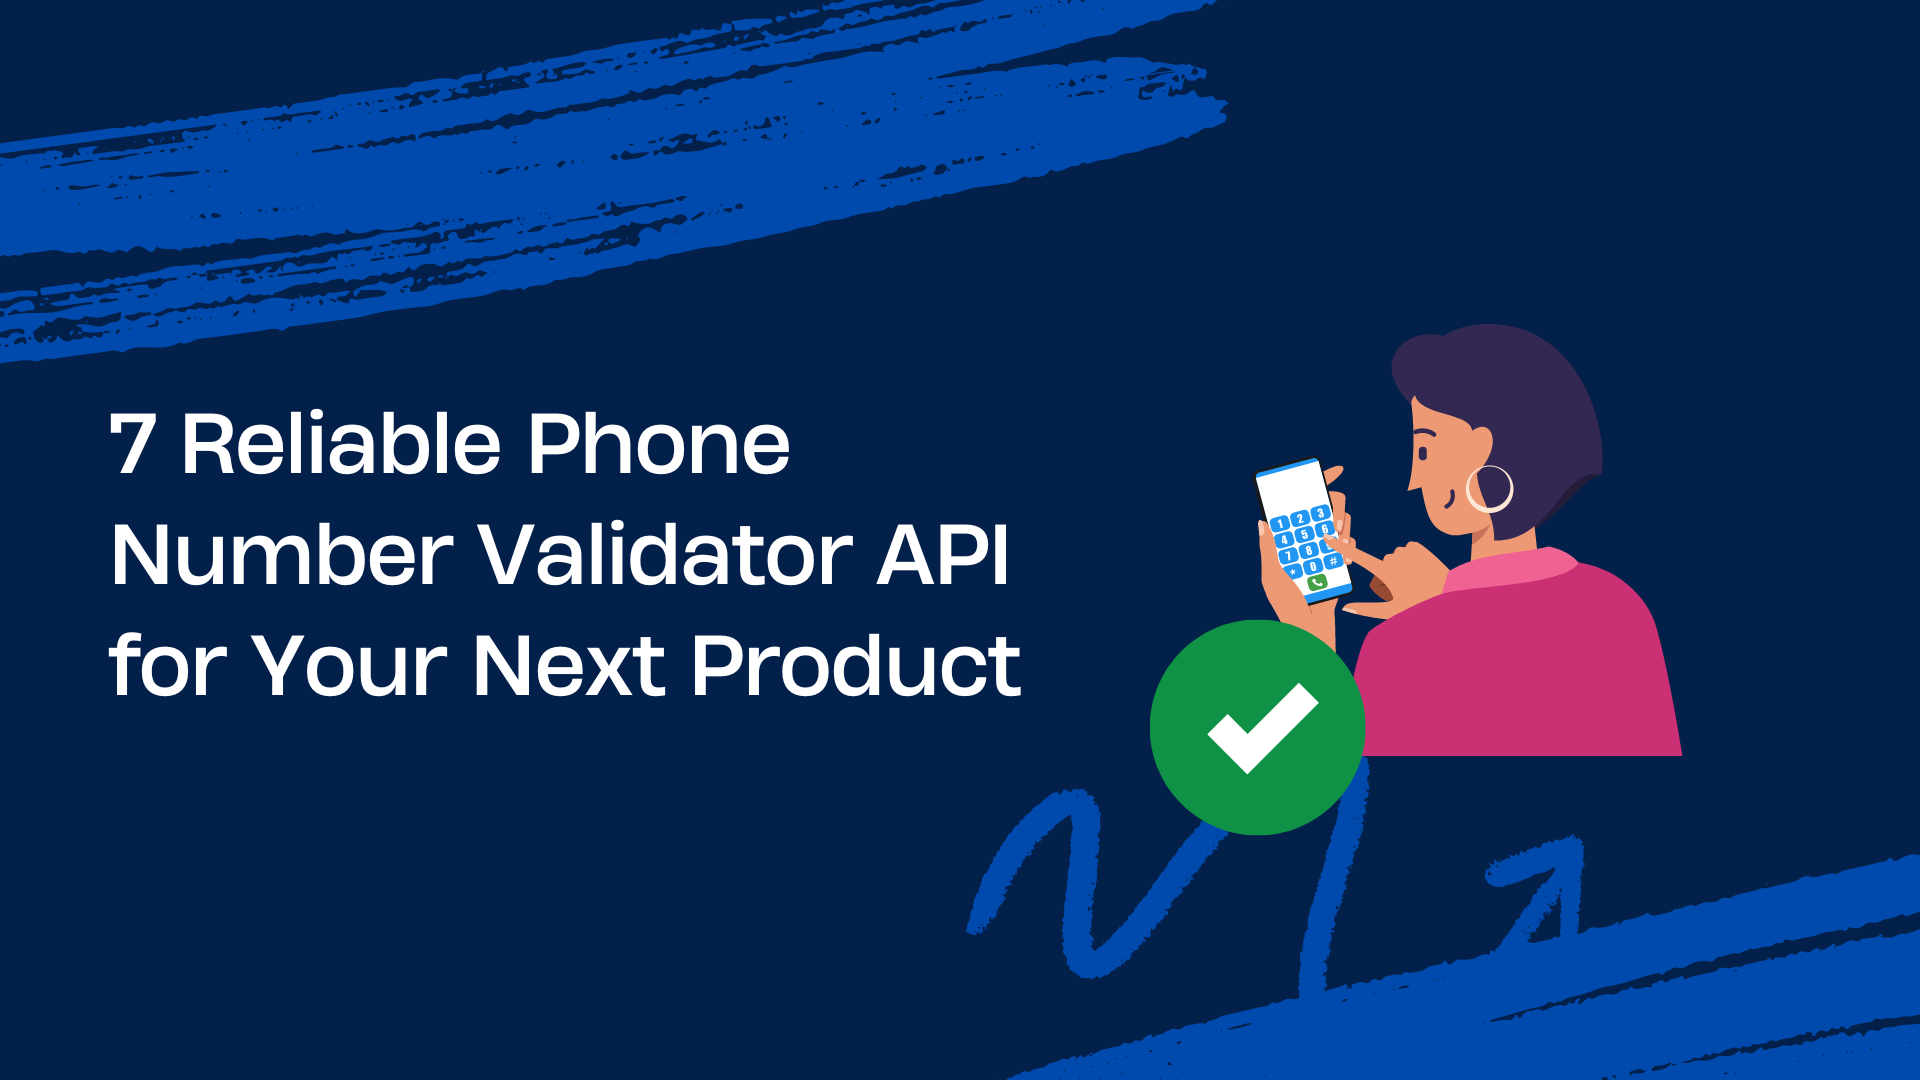 7 Reliable Phone Number Validator API for Your Next Product